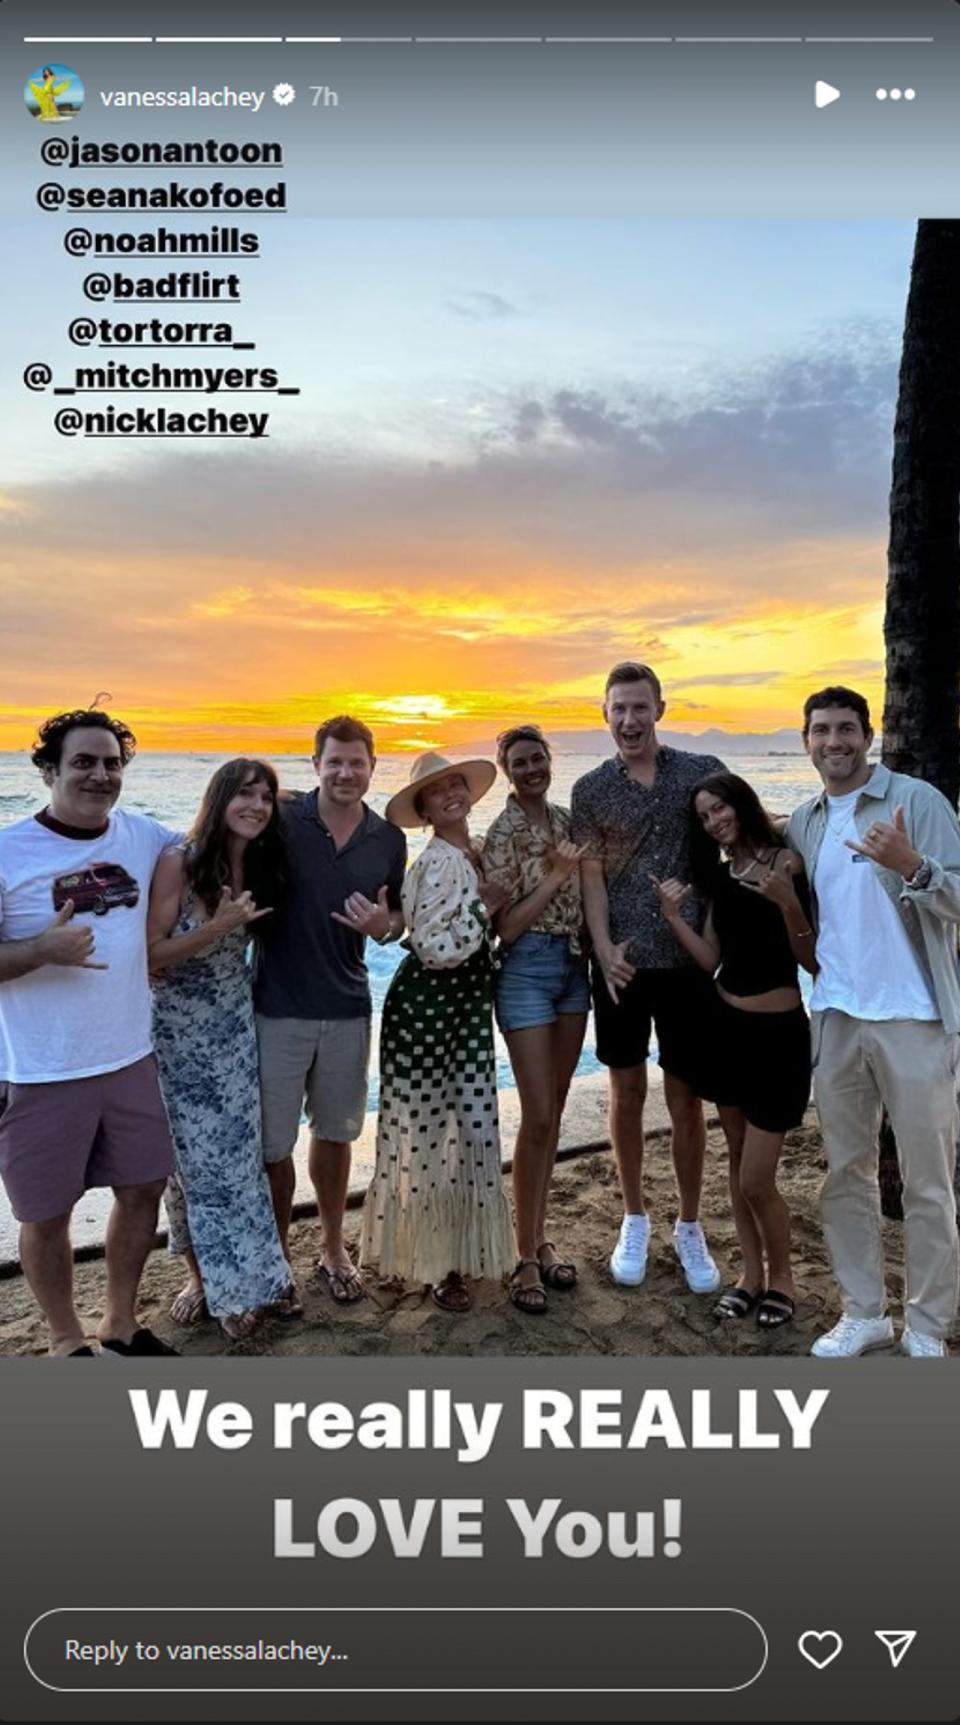 NCIS: Hawai’i cast posing for a photo together and similing in Hawai'i.